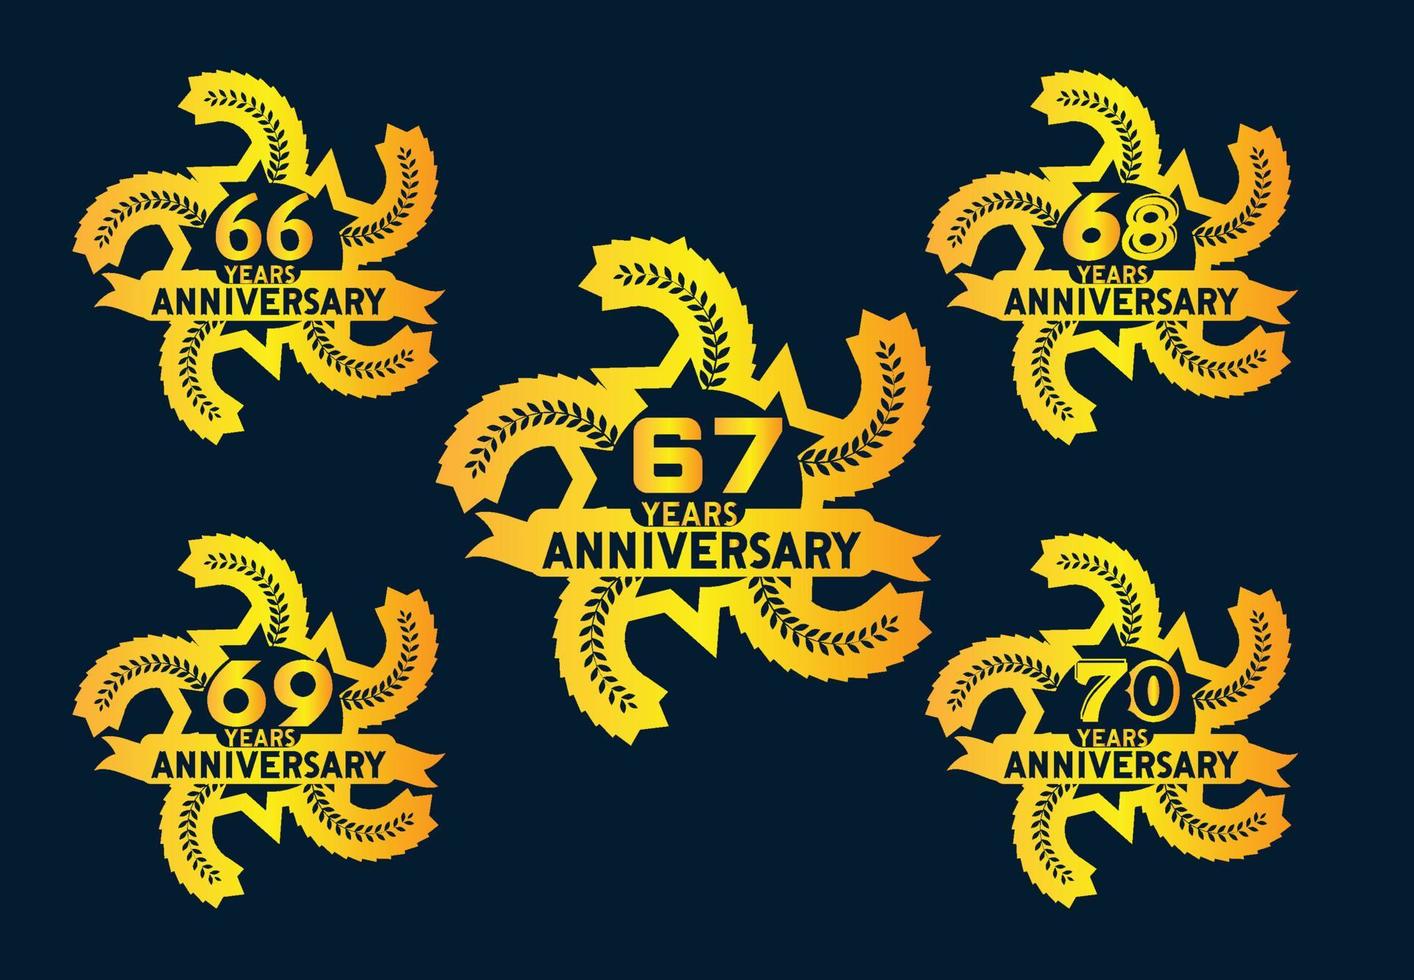 66 to 70 years anniversary logo and sticker design vector